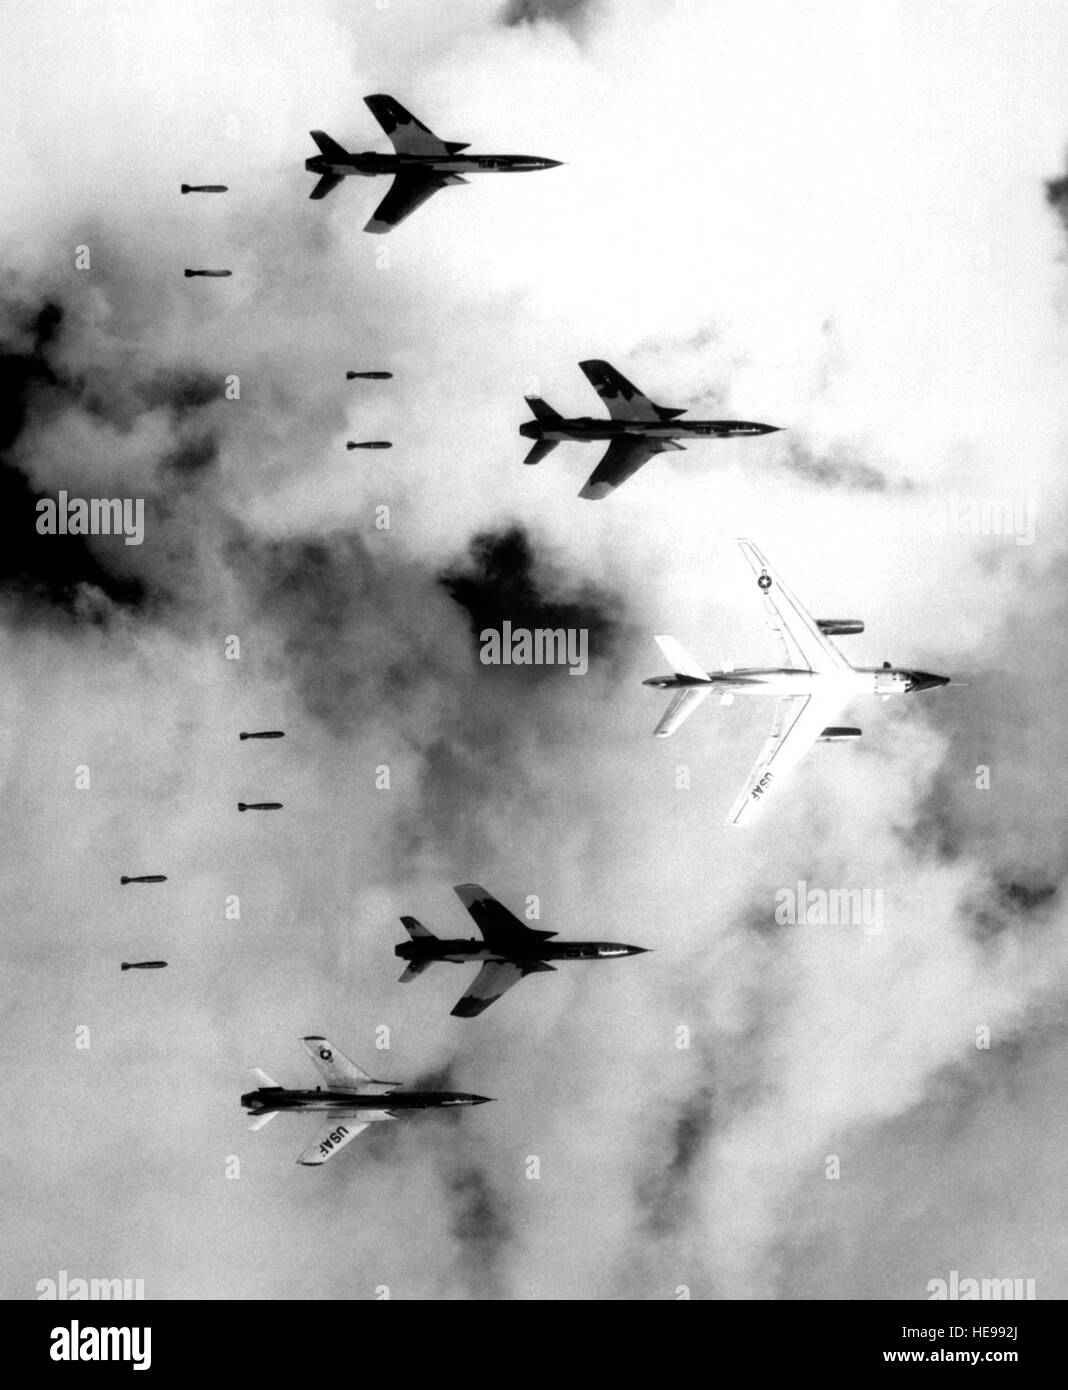 Flying under radar control with a B-66 Destroyer, Air Force F-105 Thunderchief pilots bomb a military target through low clouds over the southern panhandle of North Viet Nam.  June 14, 1966.  Lt. Col. Cecil J. Poss, USAF.  (USIA) NARA FILE #:  306-MVP-15-14 WAR & CONFLICT BOOK #:  417 Stock Photo